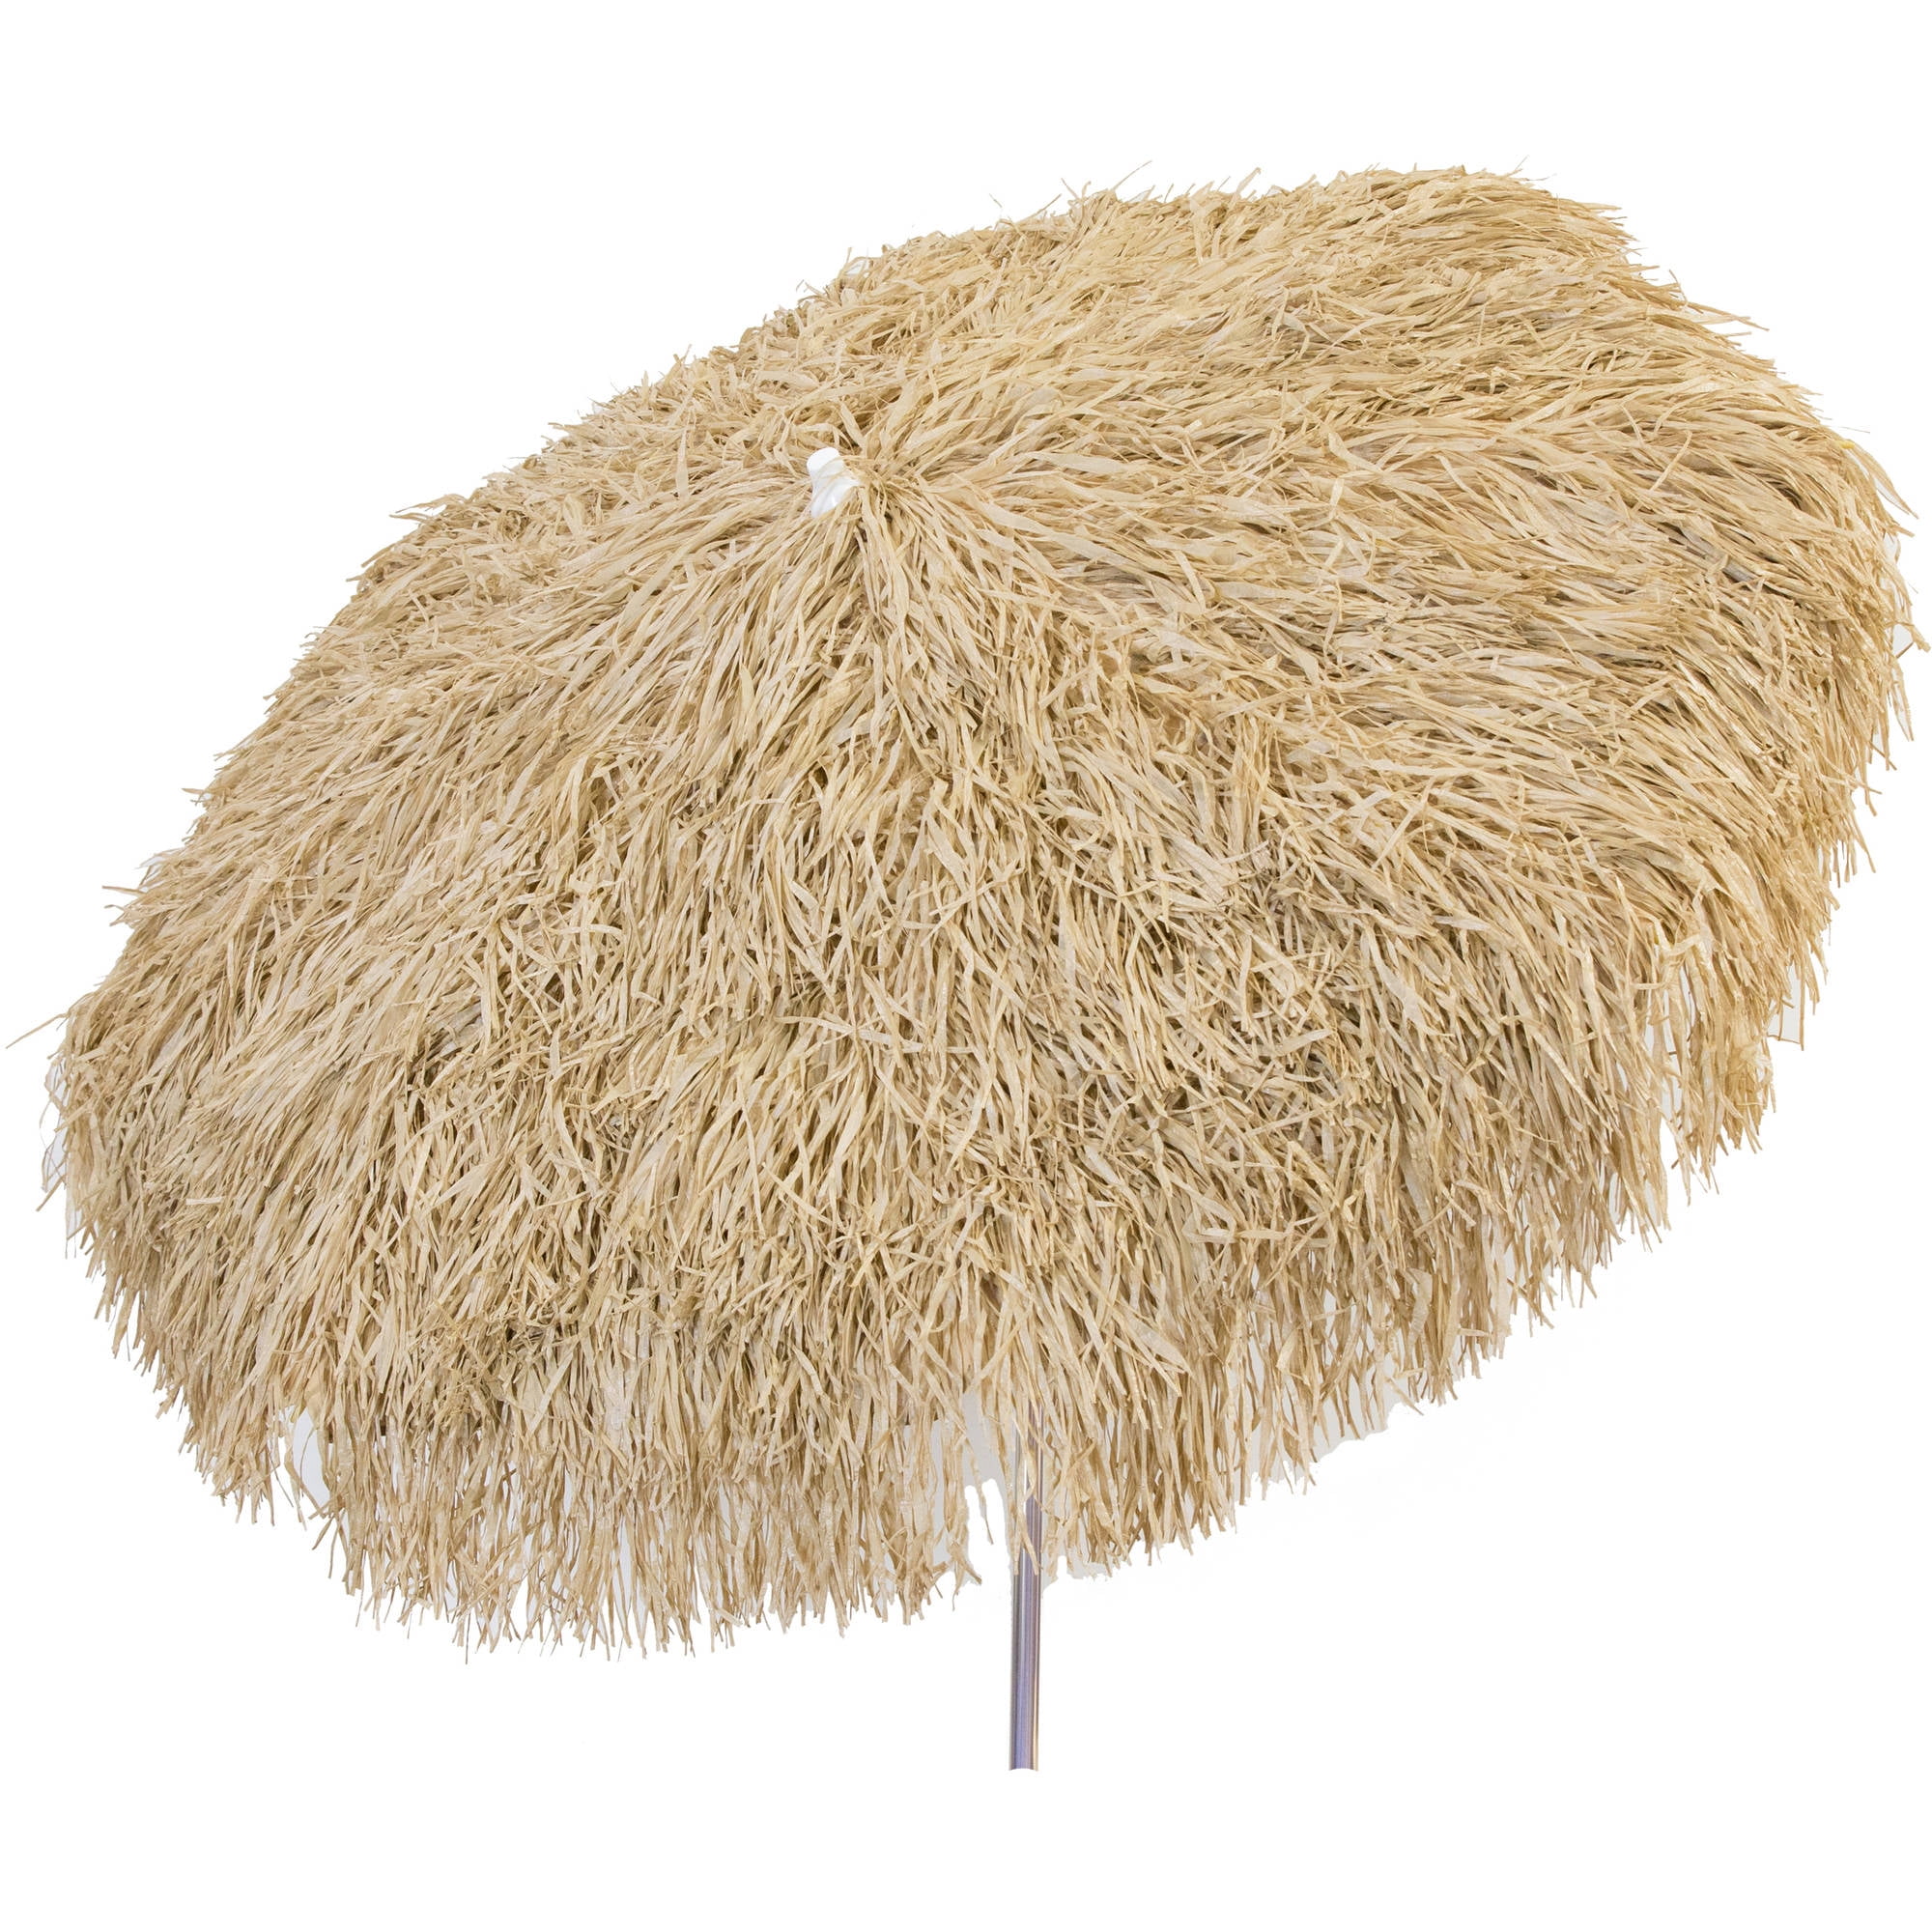 9 Ft Forever Bamboo Tiki Palapa Mexican Palm Thatch Umbrella Cover 